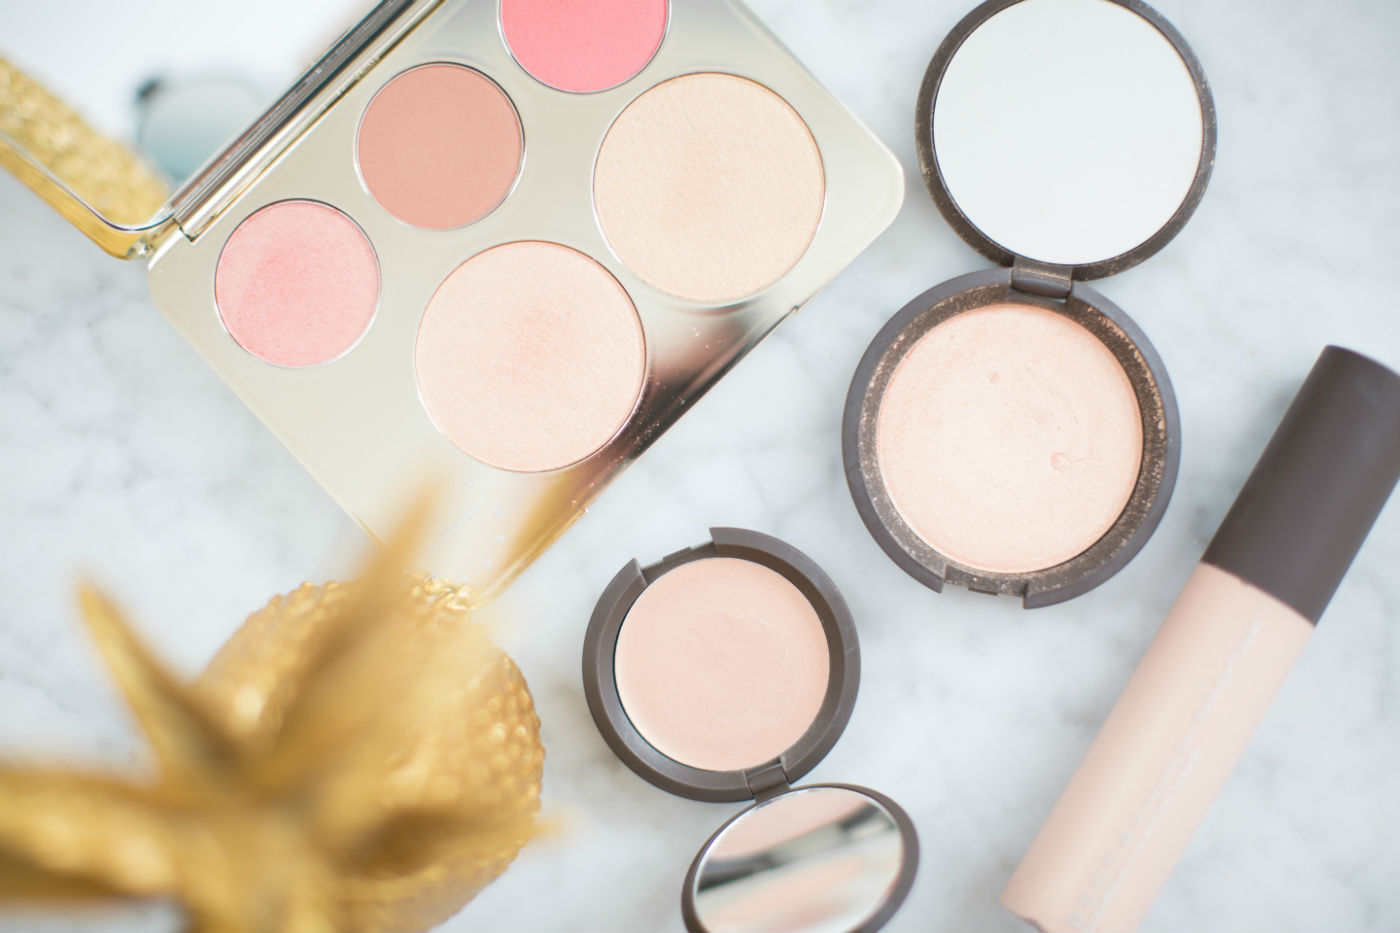 lily-pebbles-champagne-pop-becca-collection-1